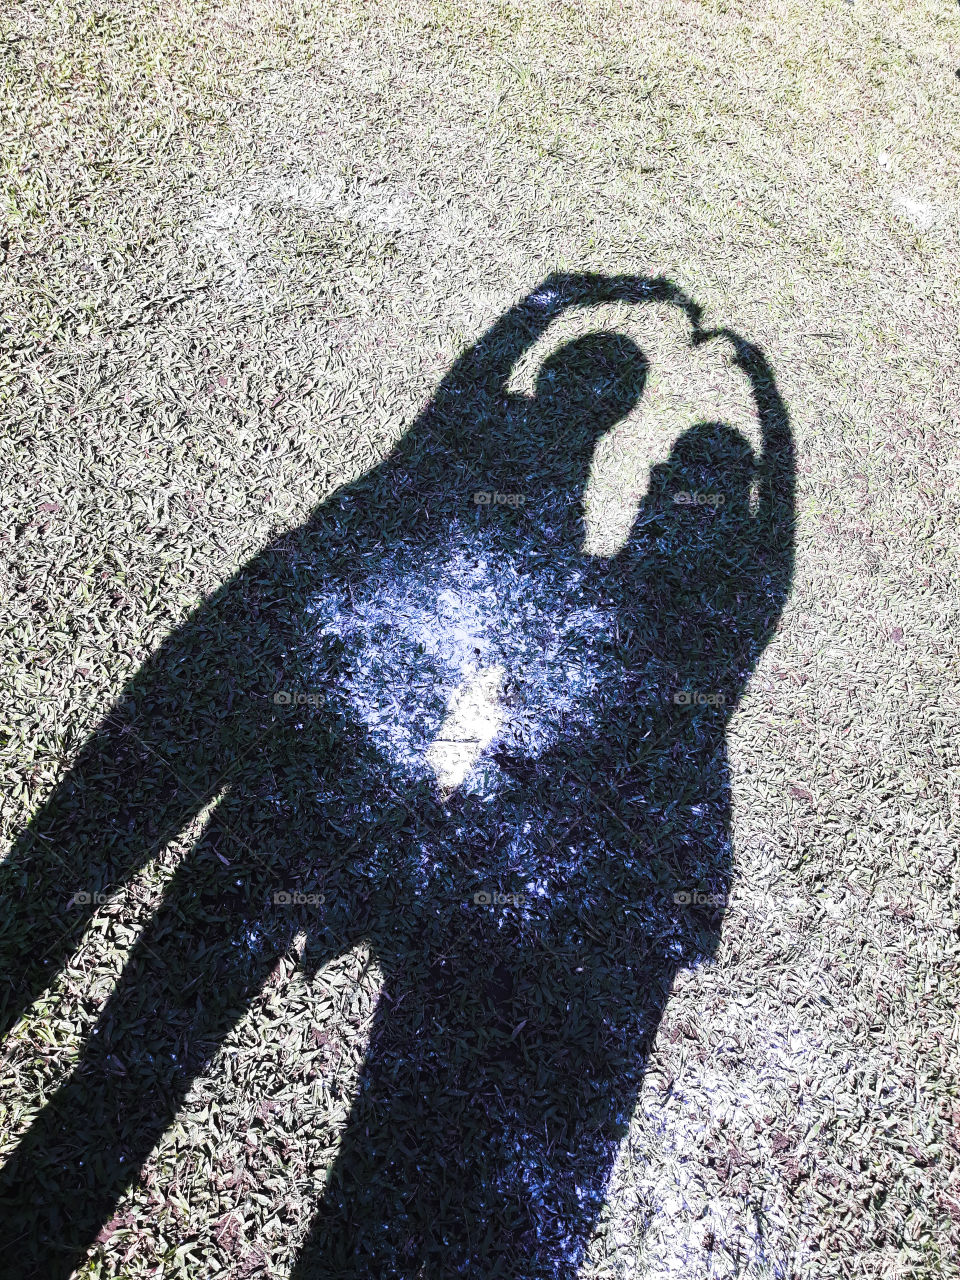 Show me your shadow